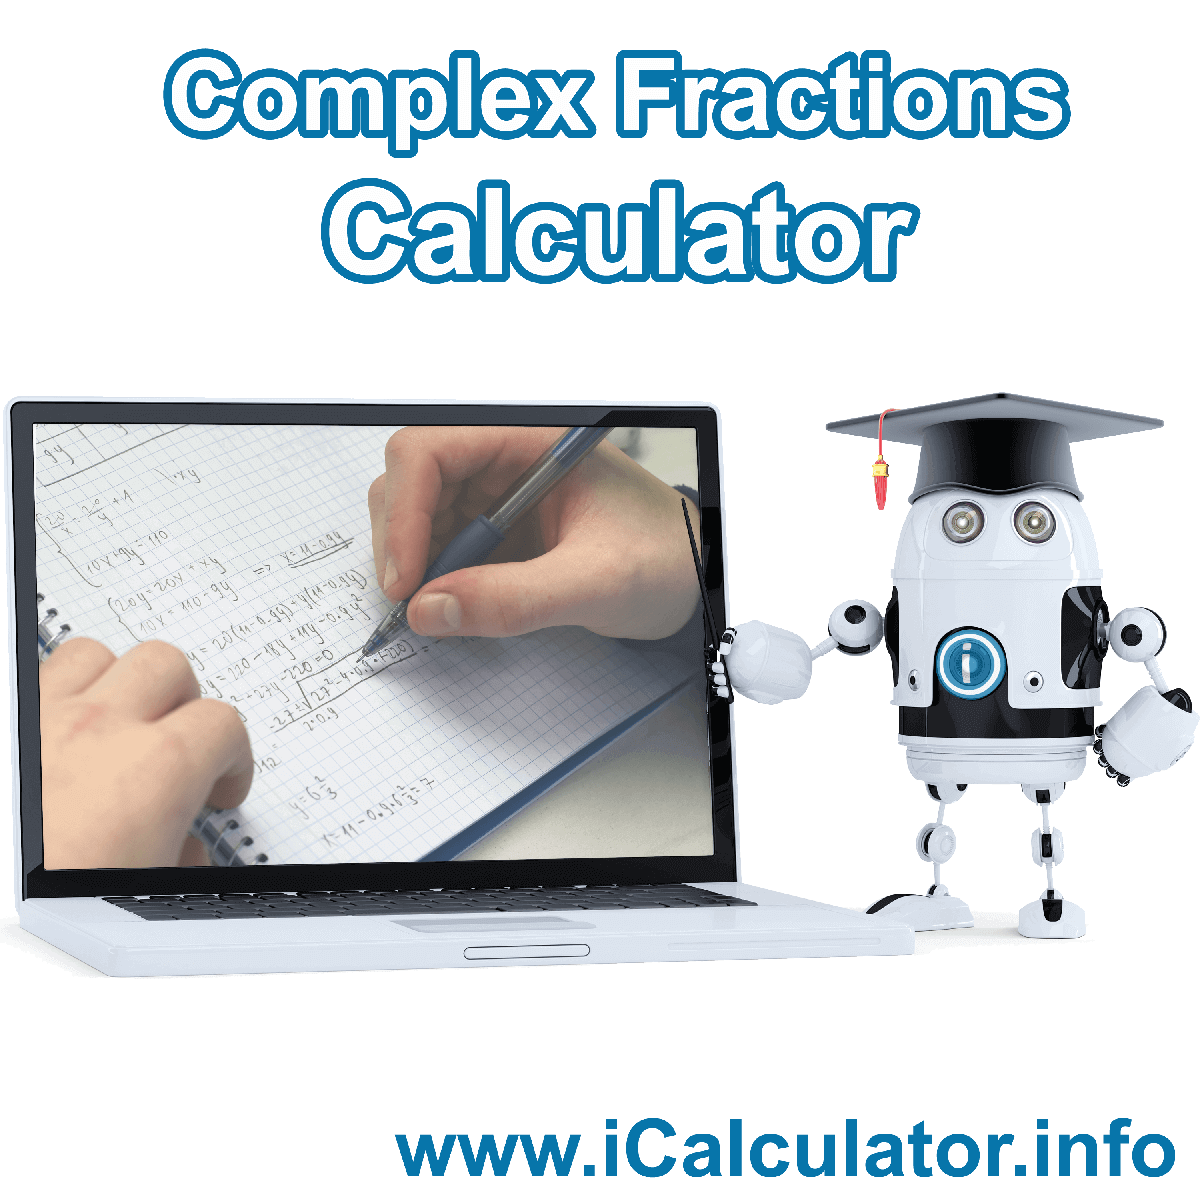 Simplifying Complex Fractions Calculator. This image shows Simplifying Complex Fractions formula with associated calculations used by the Simplifying Complex Fractions Calculator